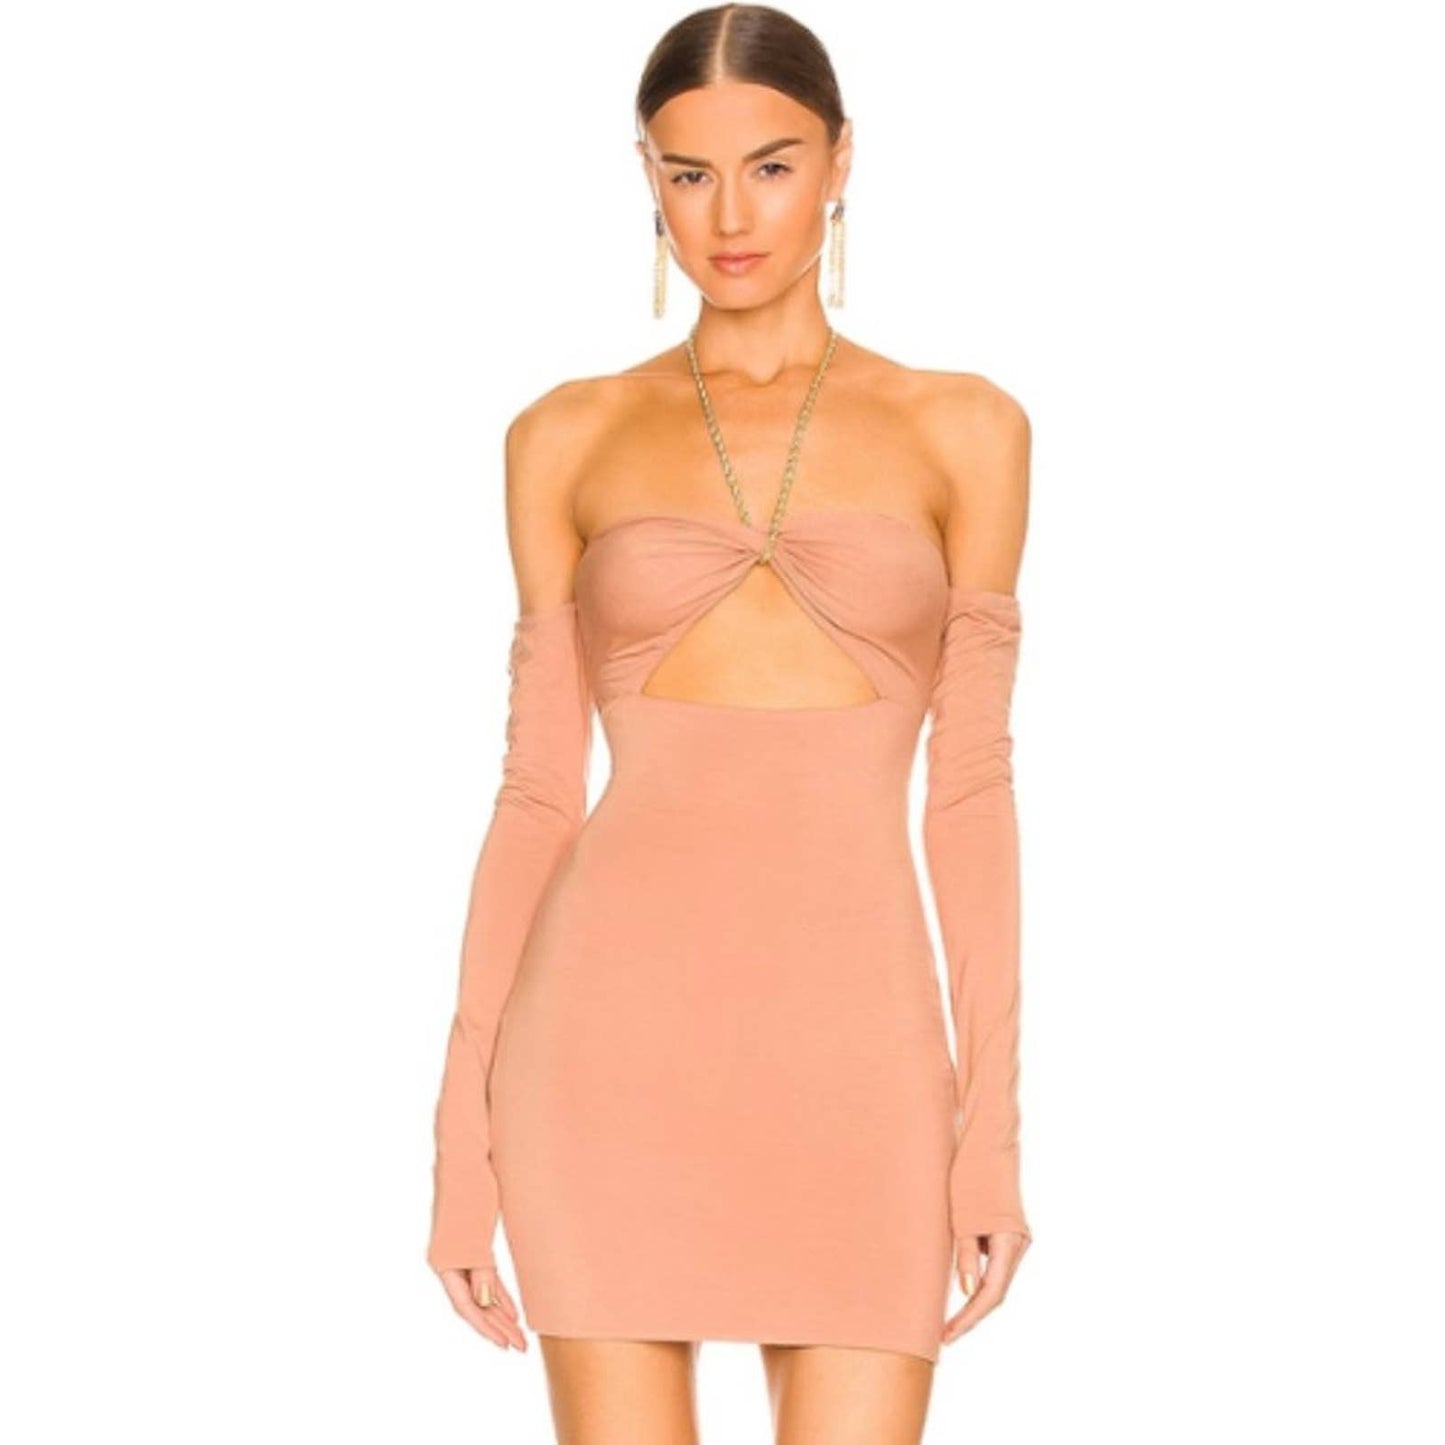 h:ours Imuni Mini Dress in Camel NWT Size Small